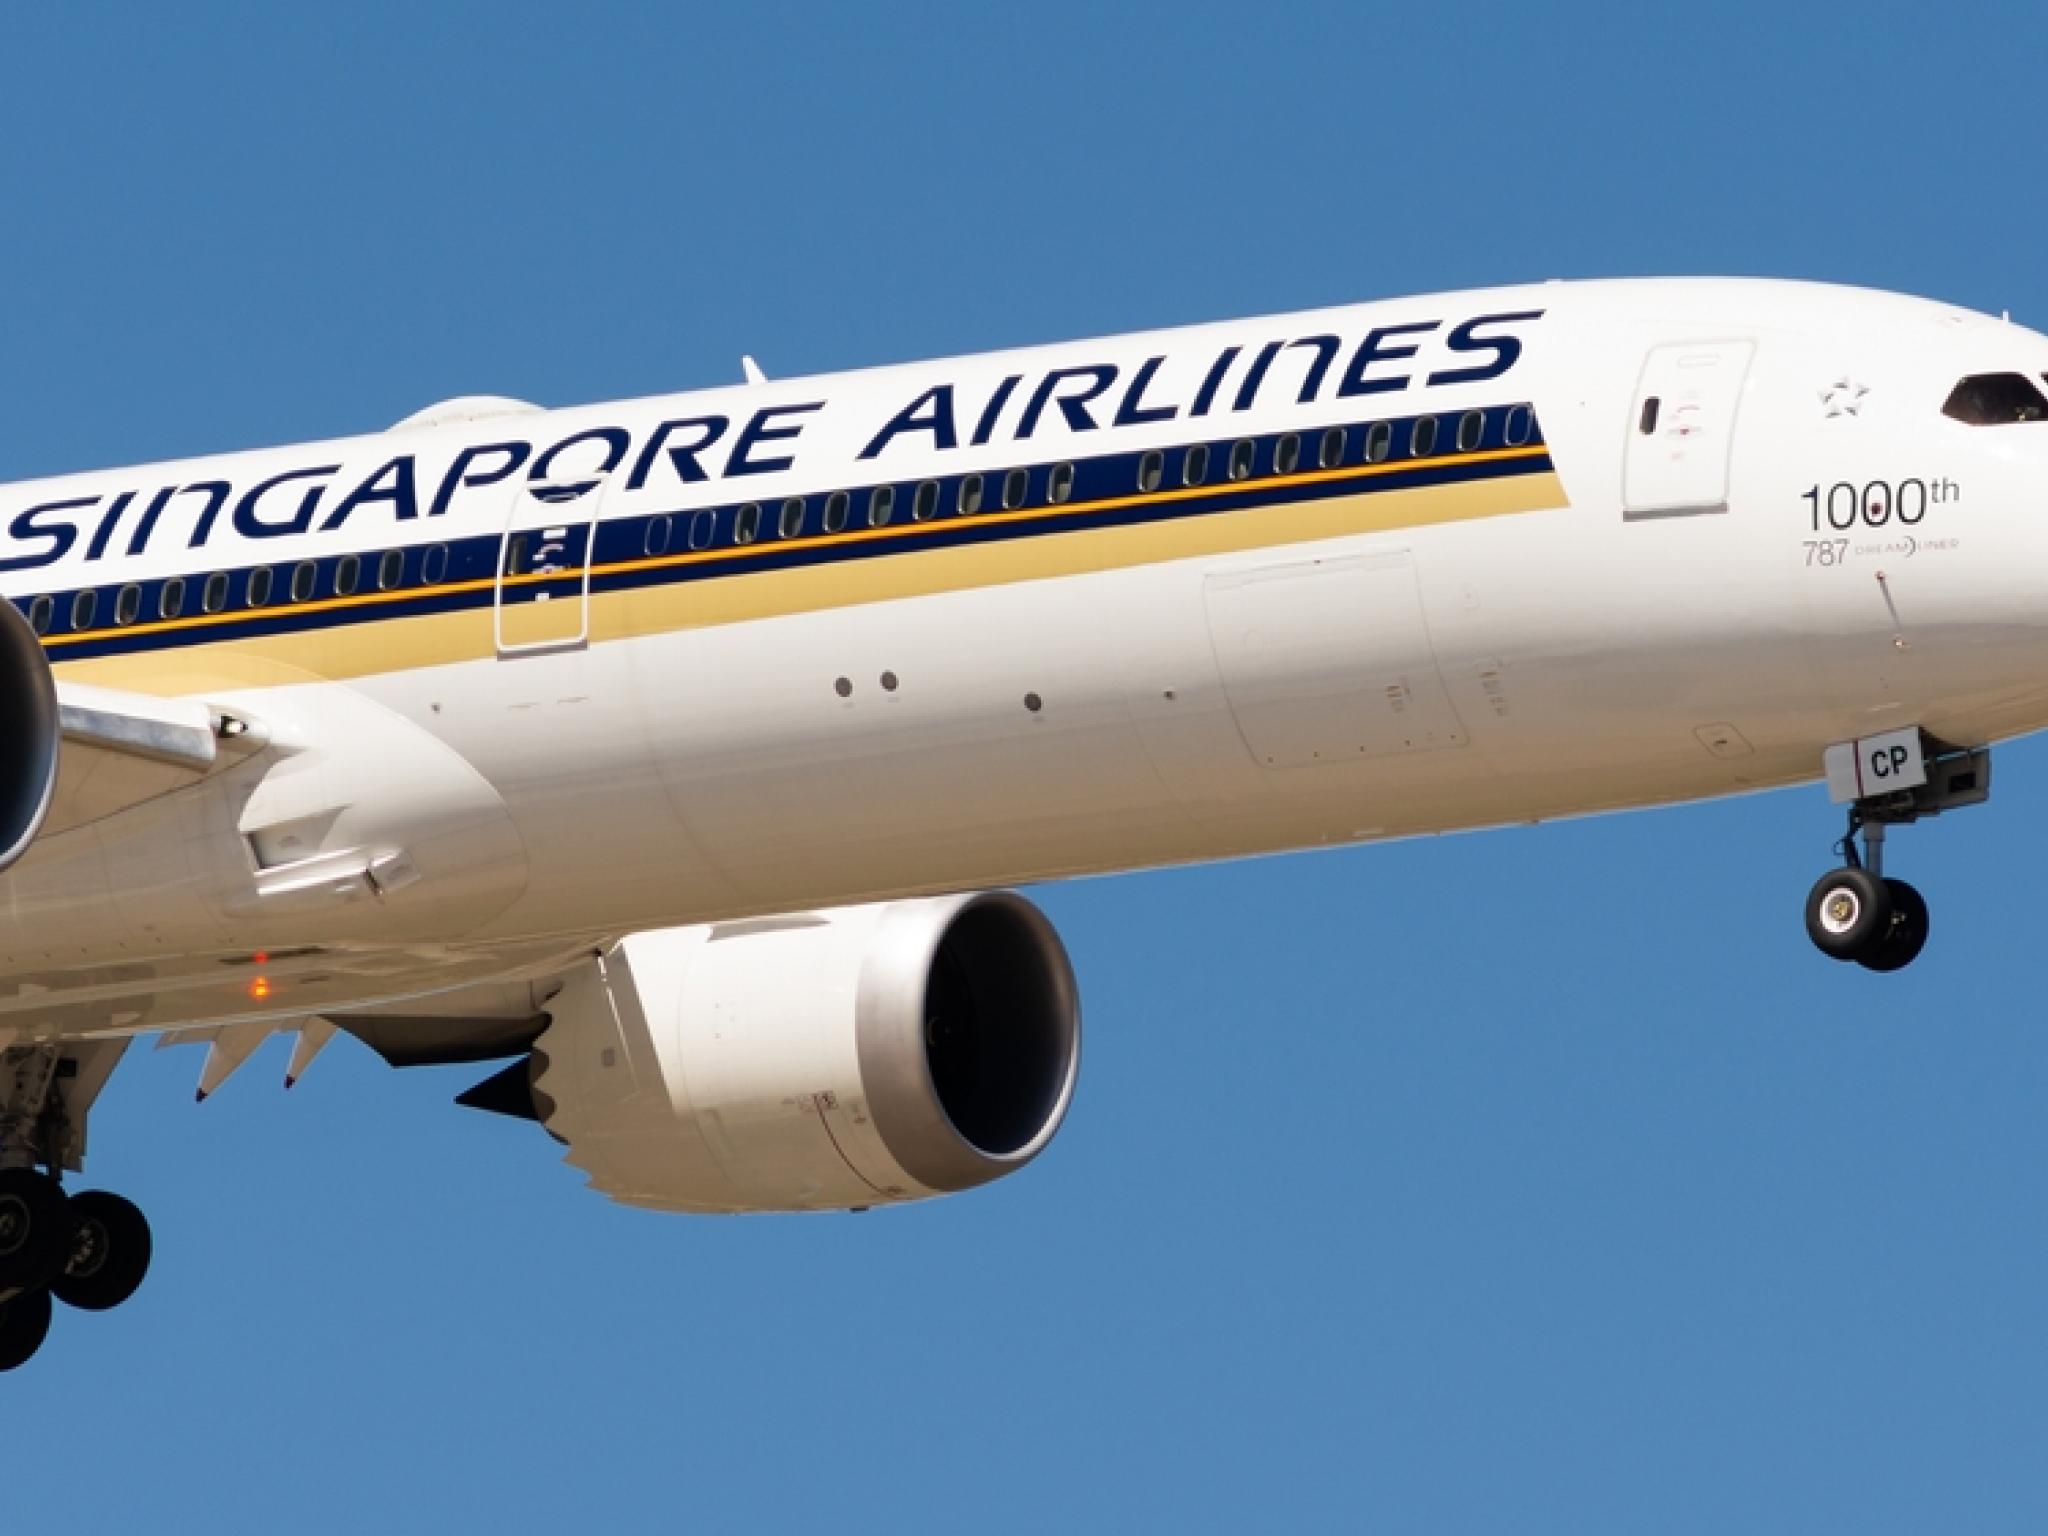  singapore-airlines-alters-policies-flight-route-after-fatal-turbulence-incident-that-killed-one 